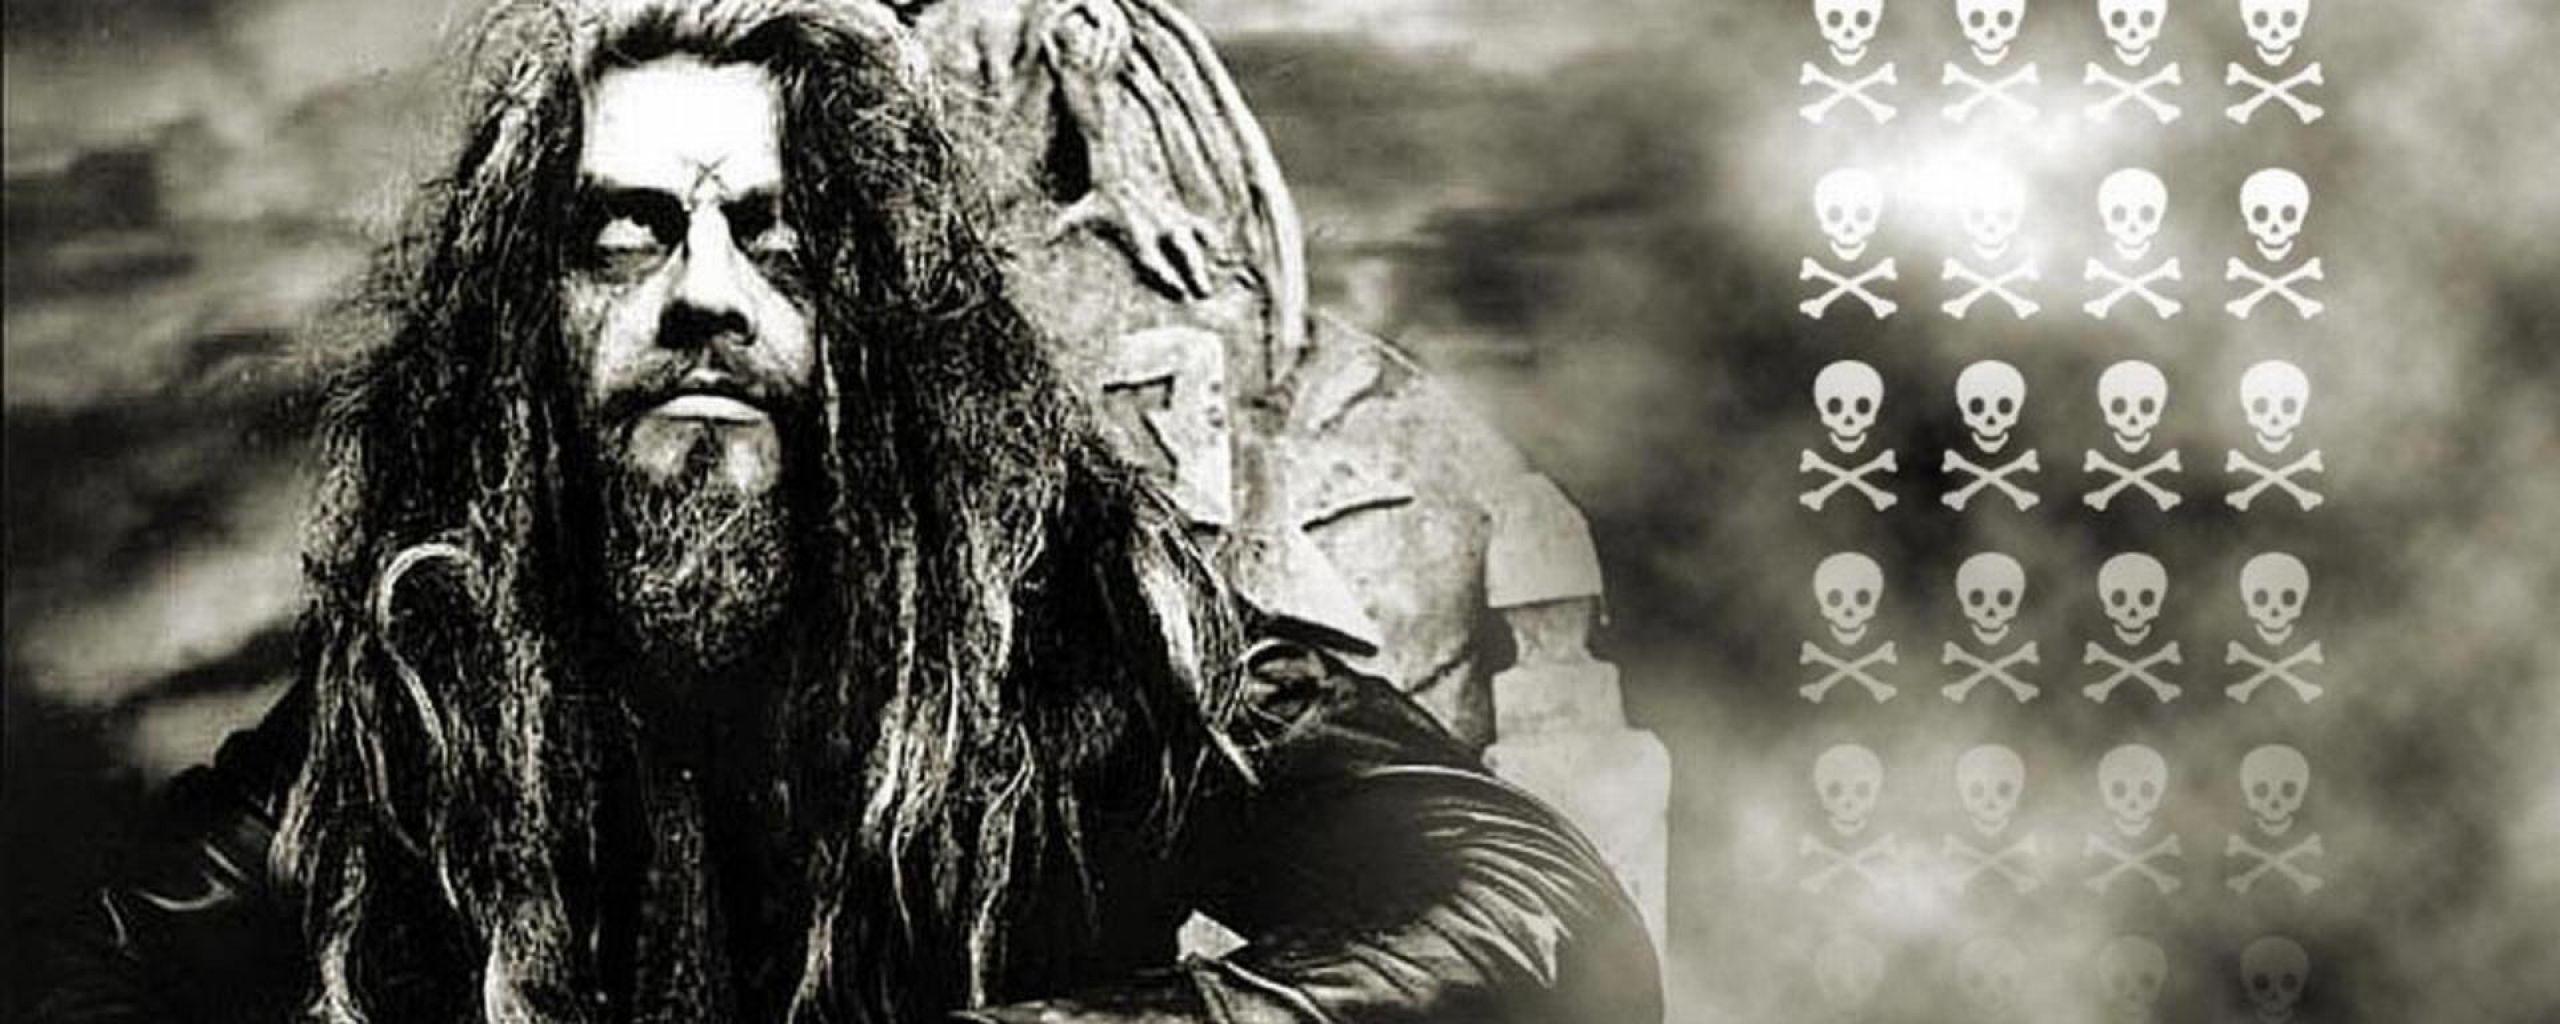 Download Wallpaper 2560x1024 rob zombie, image, soloist, throne